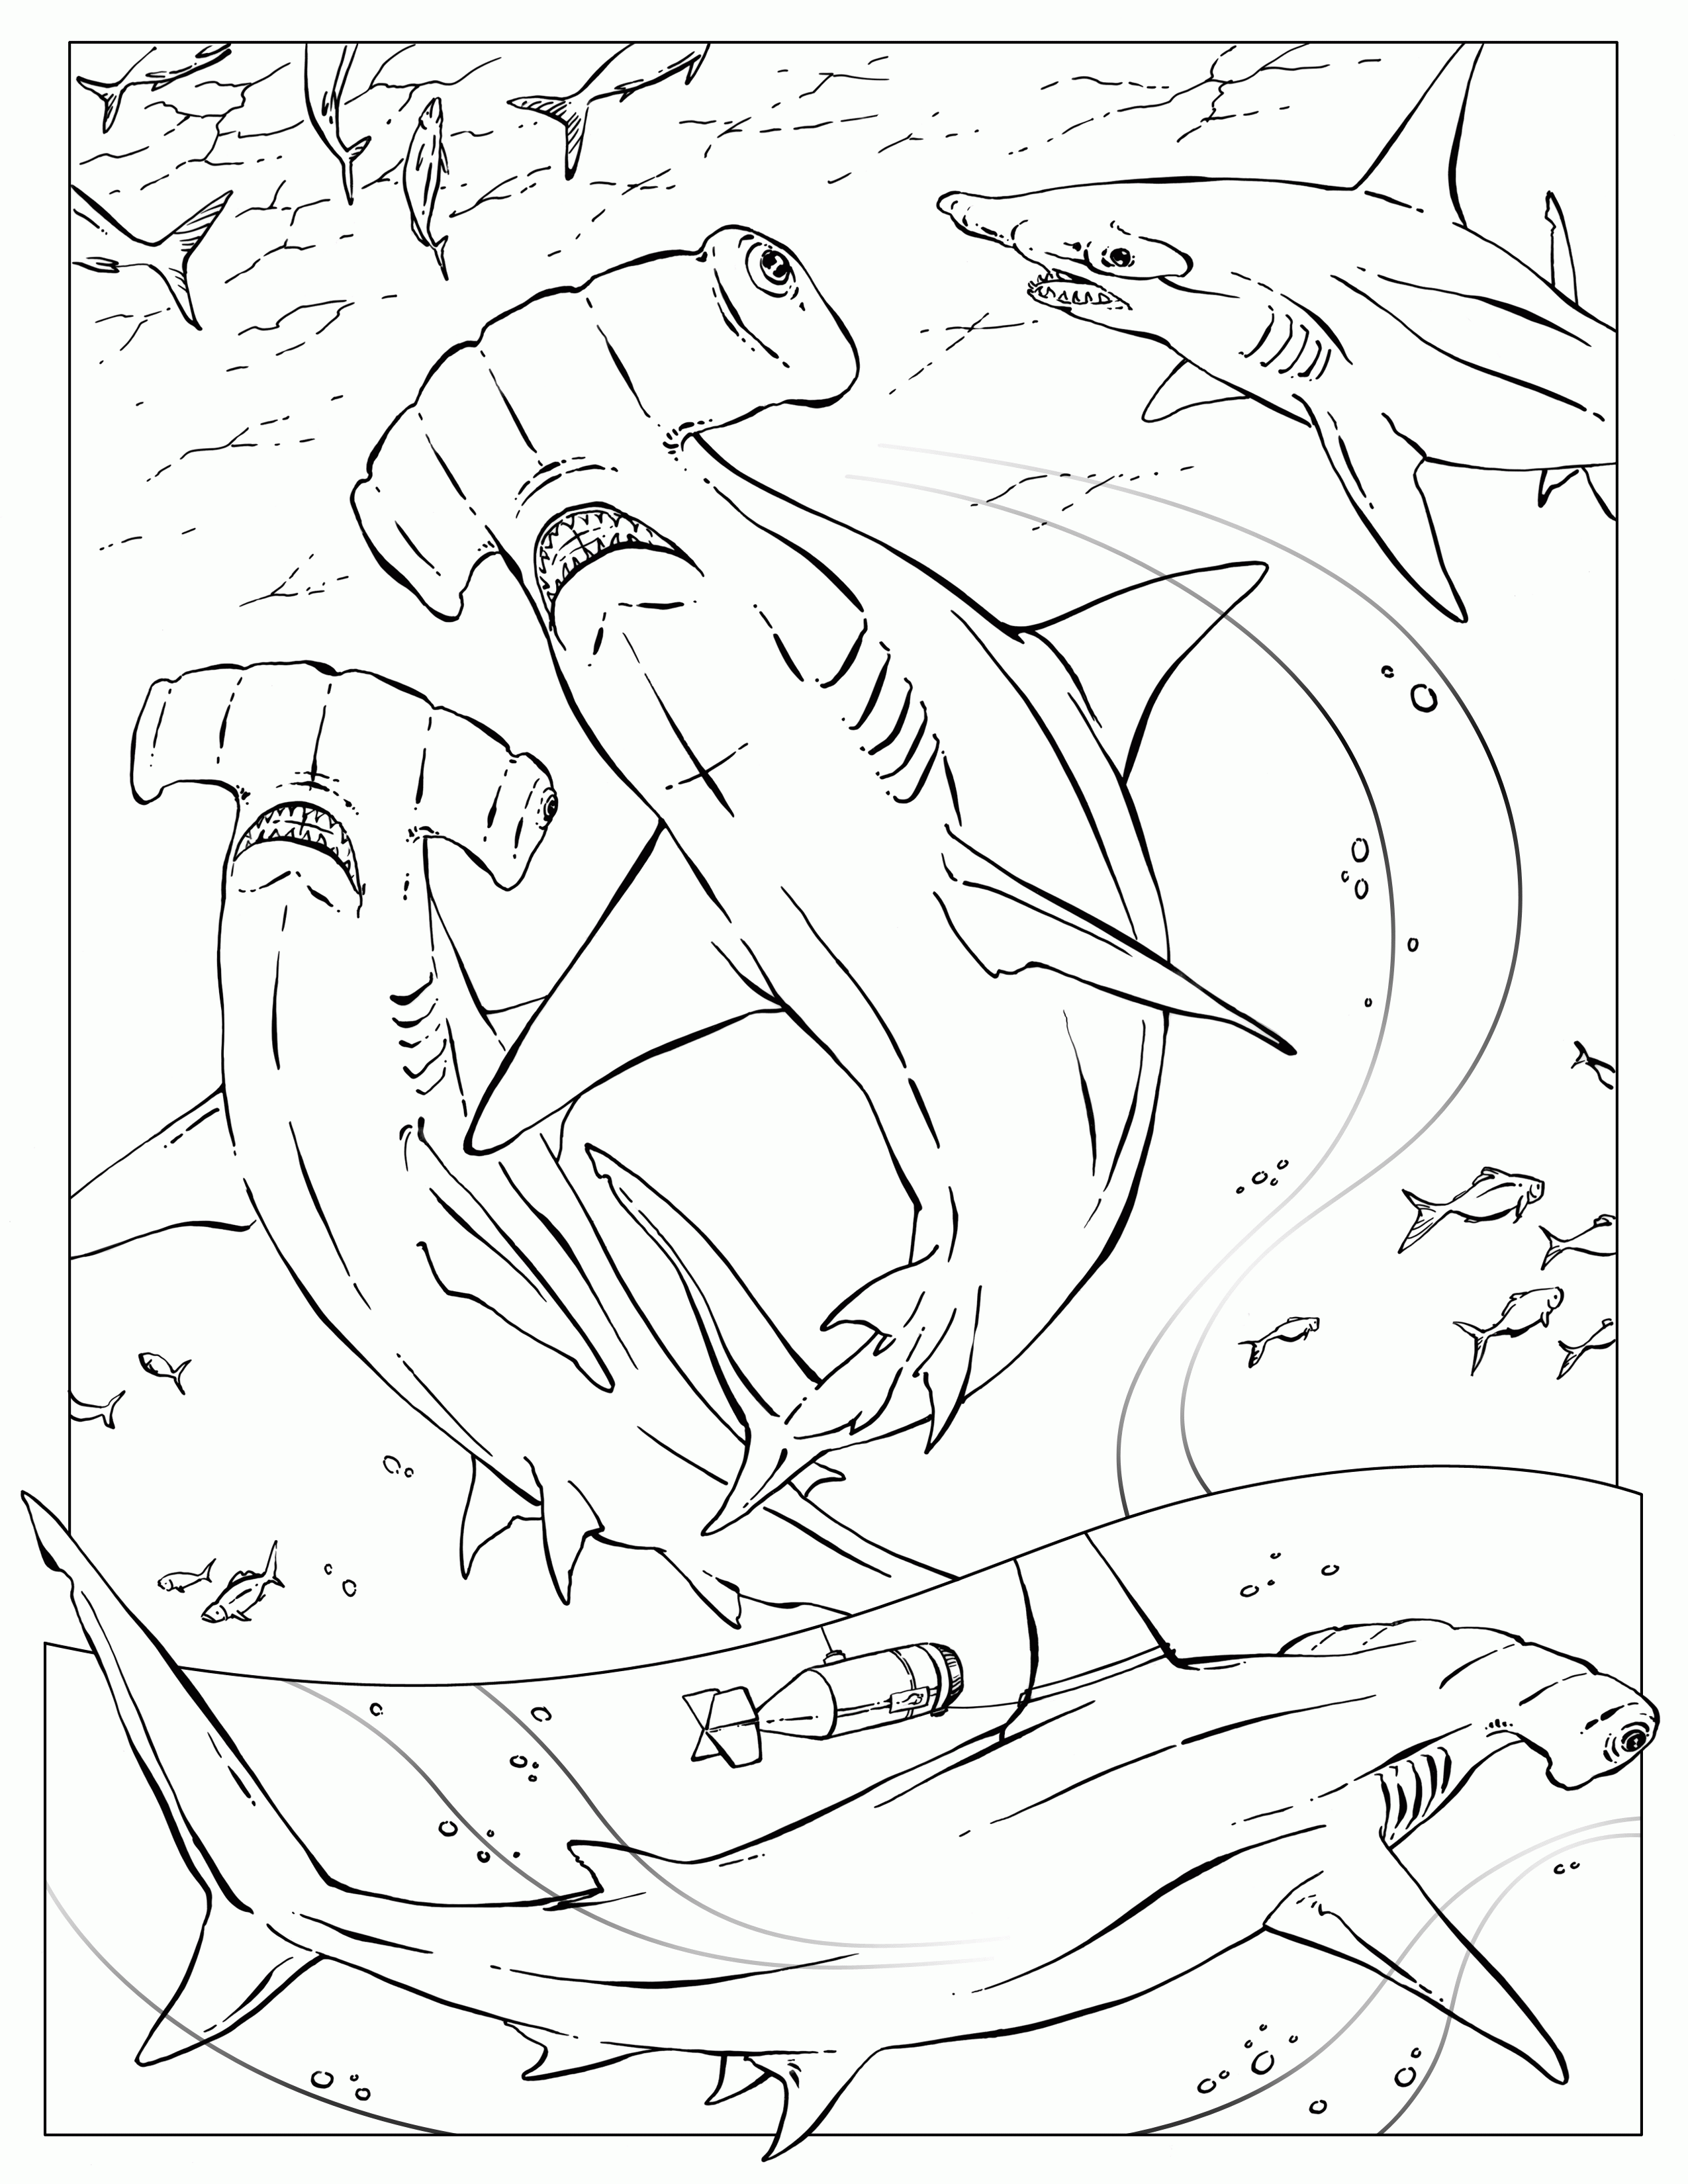 9 Pics of Scalloped Hammerhead Shark Coloring Pages - Shark ...